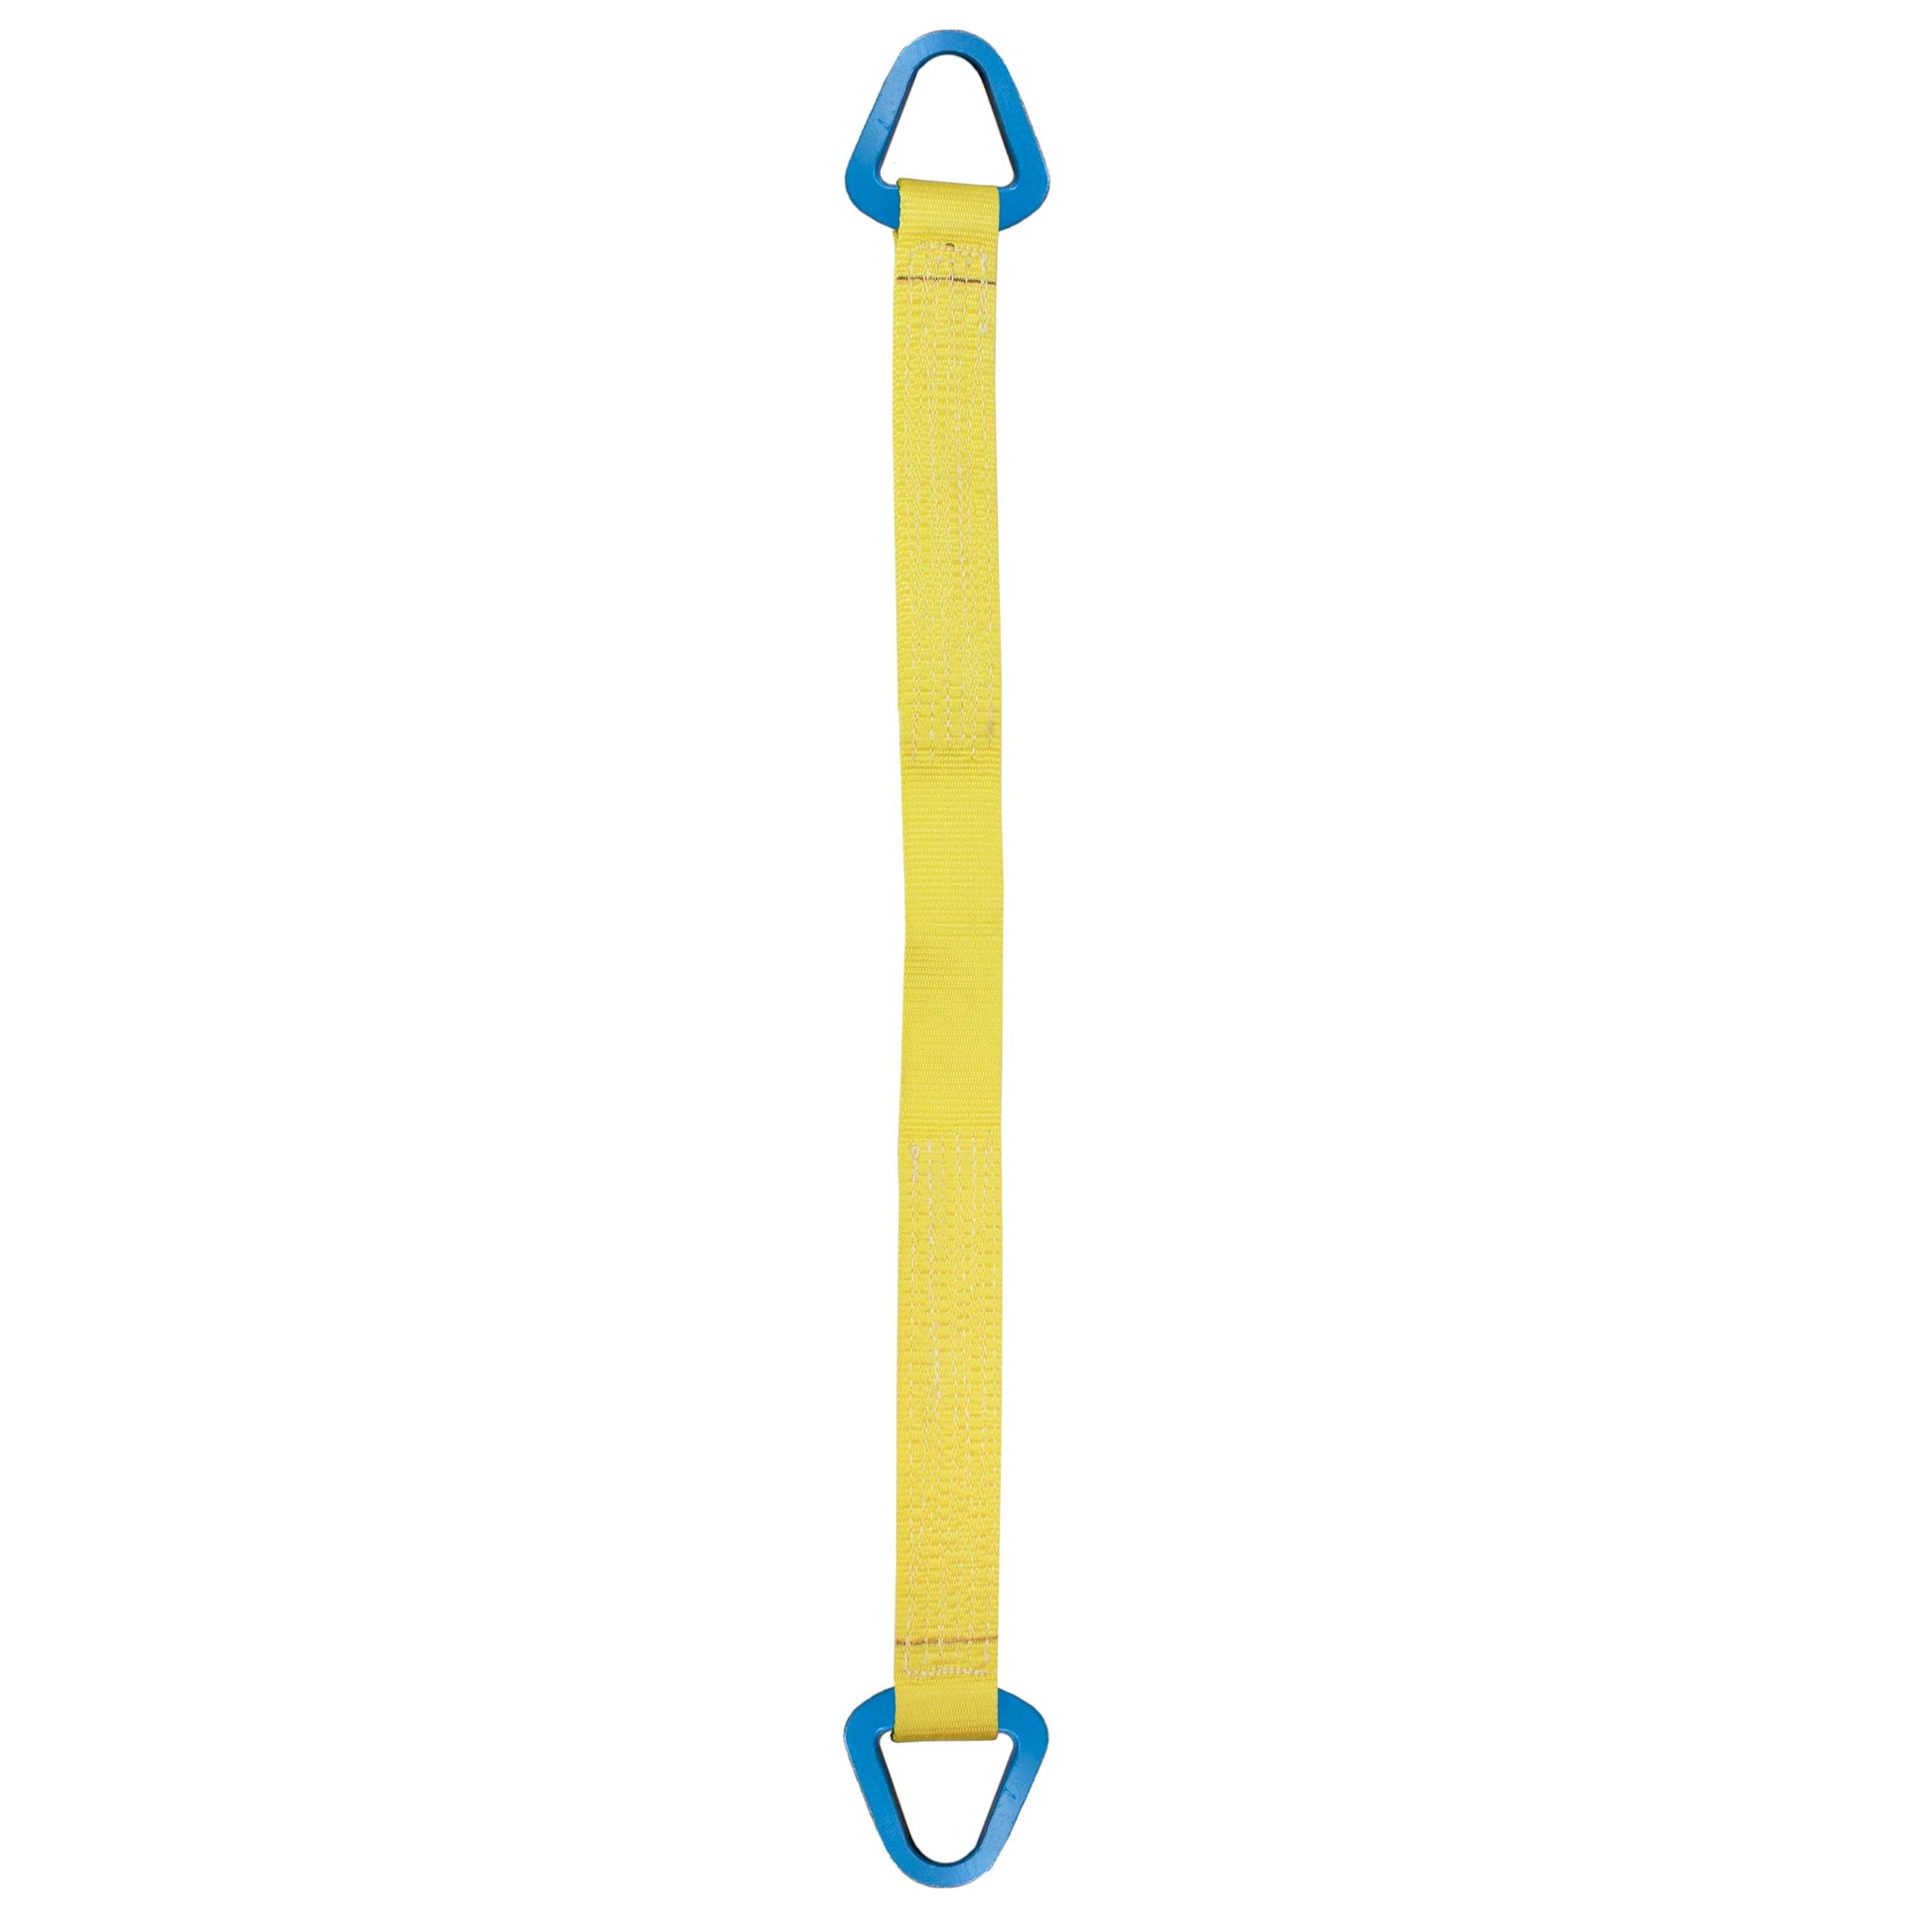 Nylon Lifting Sling Triangle 3 inch x 12 foot 1ply image 1 of 2